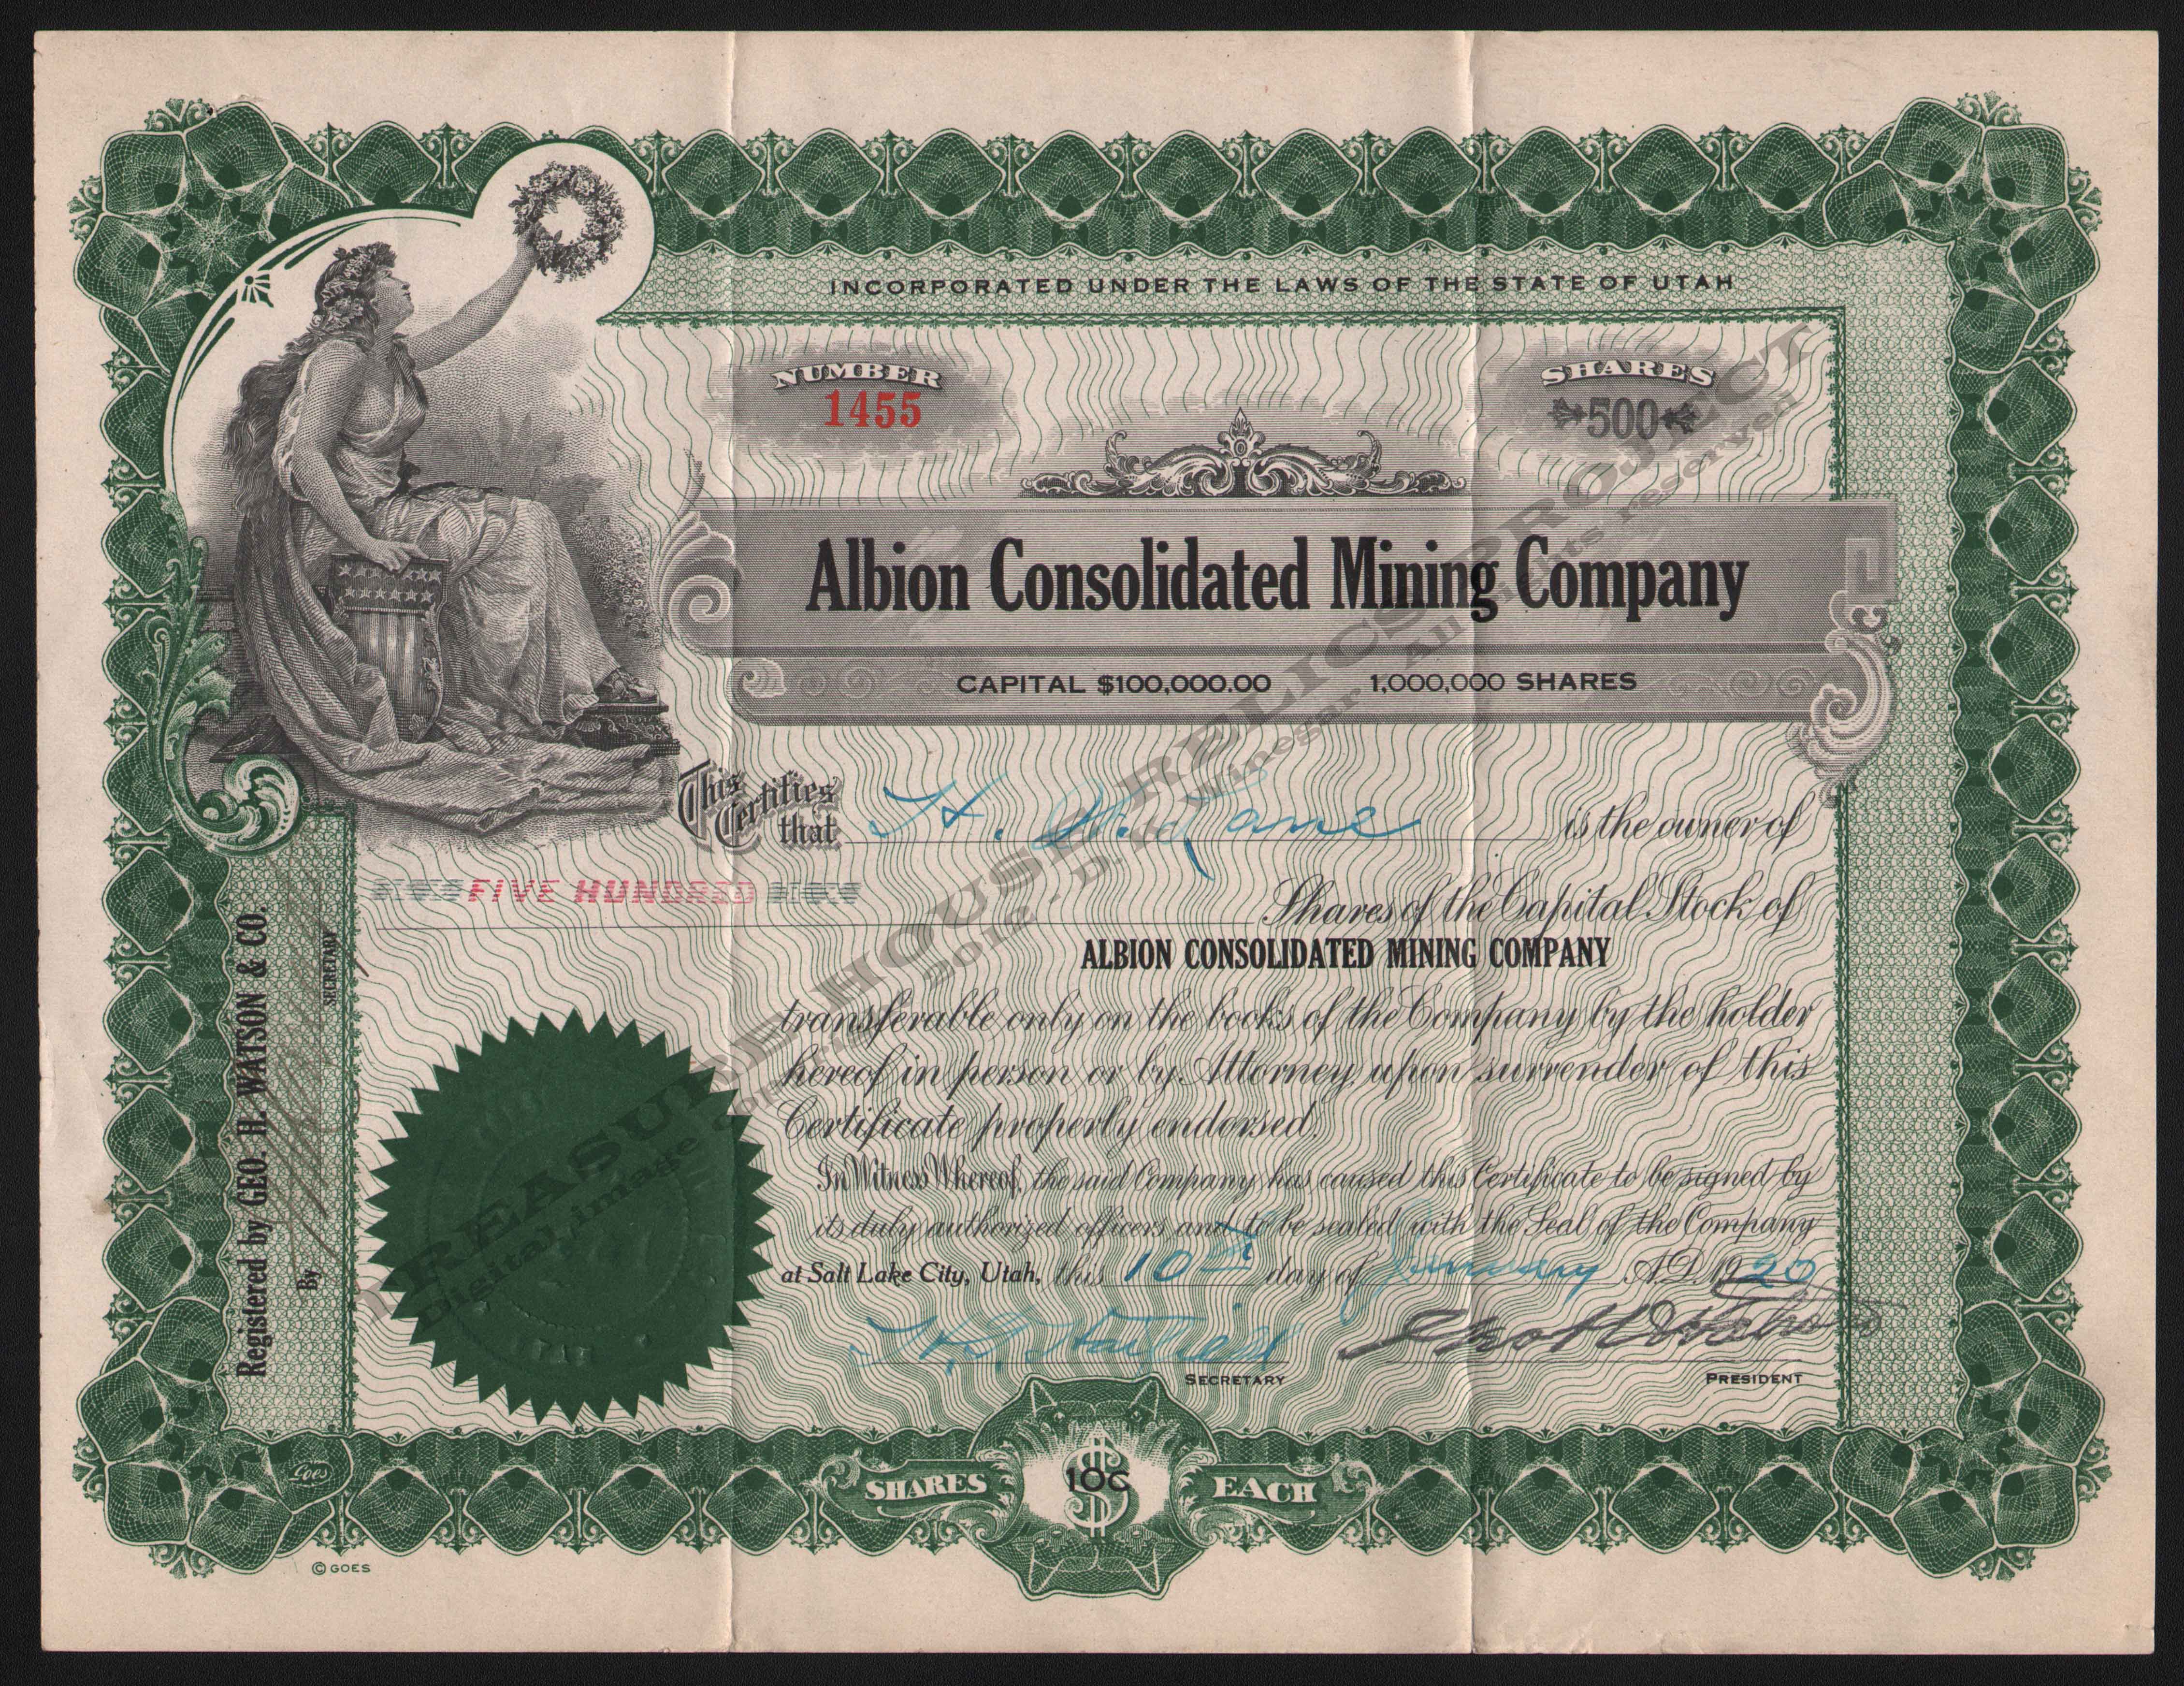 LETTERHEAD/ALBION_CONSOLIDATED_MINING_CO_1455_1920_BAM_400_CROP_EMBOSS.jpg